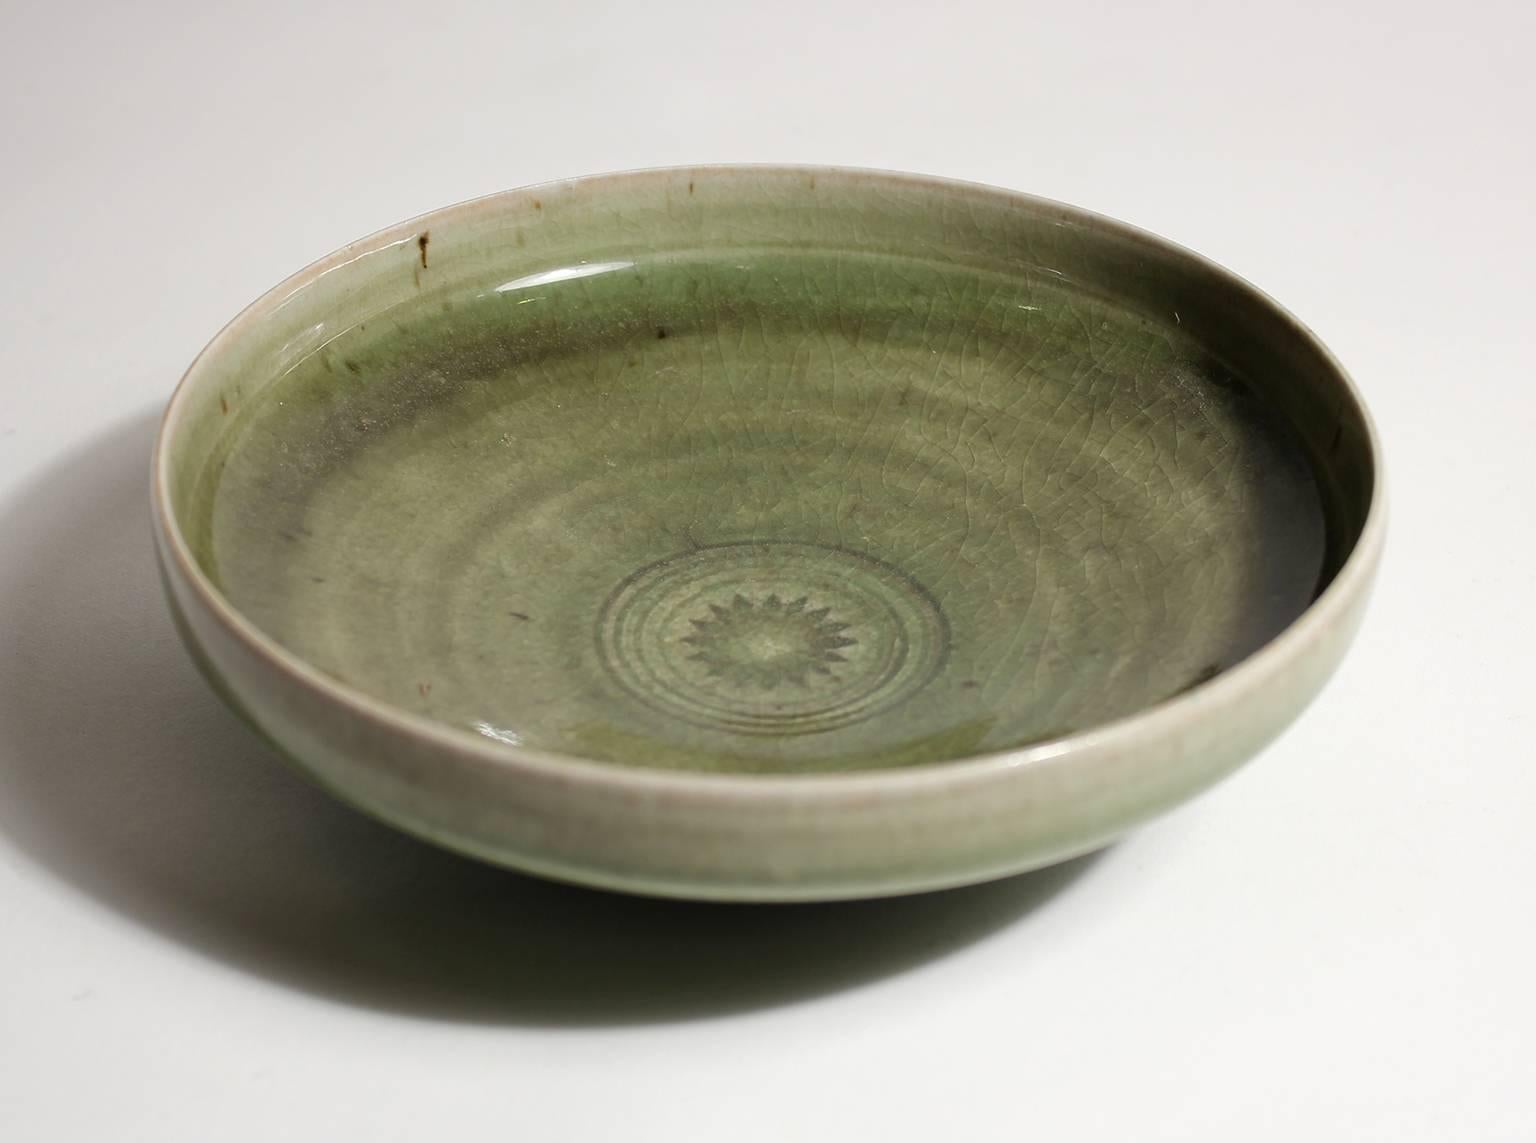 Beautiful signed California artist Laura Andreson celadon green low bowl. Hand thrown by the artist. Measures 6